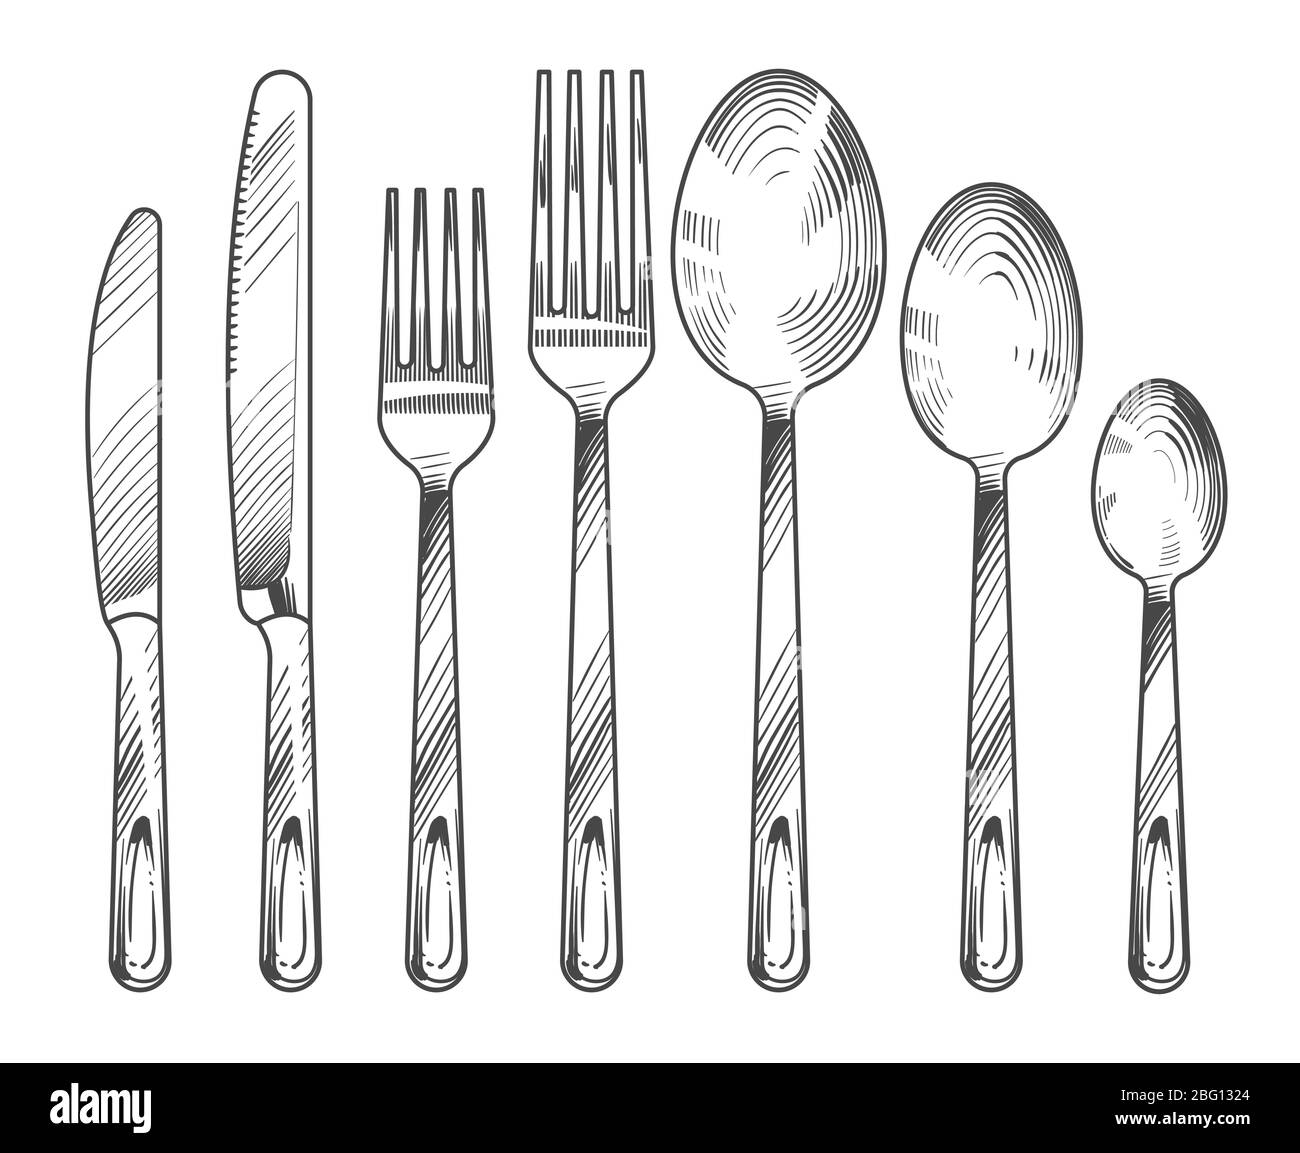 Sketch silver knife, fork and spoon. Hand drawn cutlery vector set. Cutlery silver knife and fork, sketch dinner silverware illustration Stock Vector